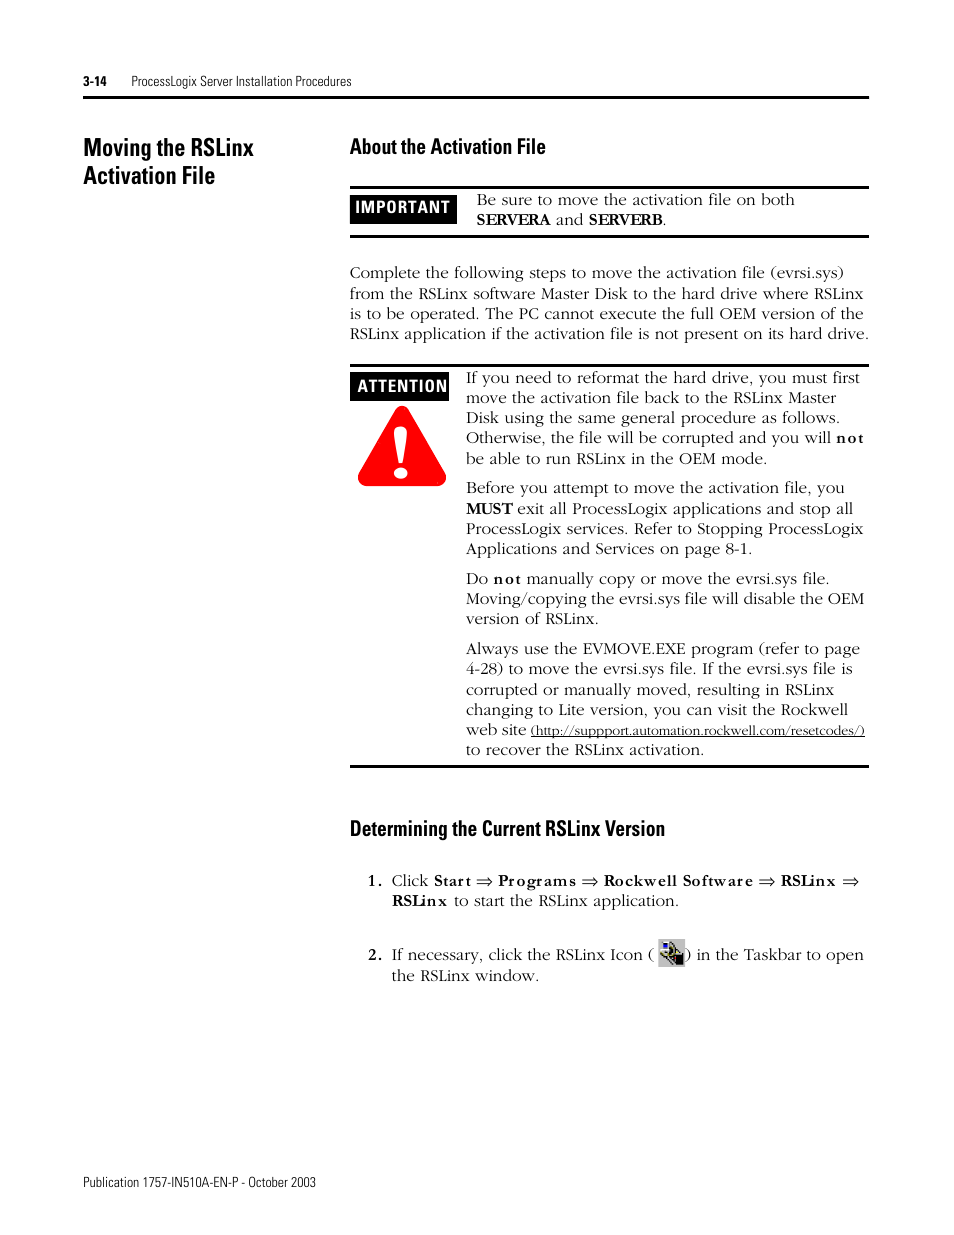 Moving the rslinx activation file, About the activation file, Determining the current rslinx version | Moving the rslinx activation file -14 | Rockwell Automation 1757-SWKIT5100 ProcessLogix R510.0 Installation and Upgrade Guide User Manual | Page 76 / 271